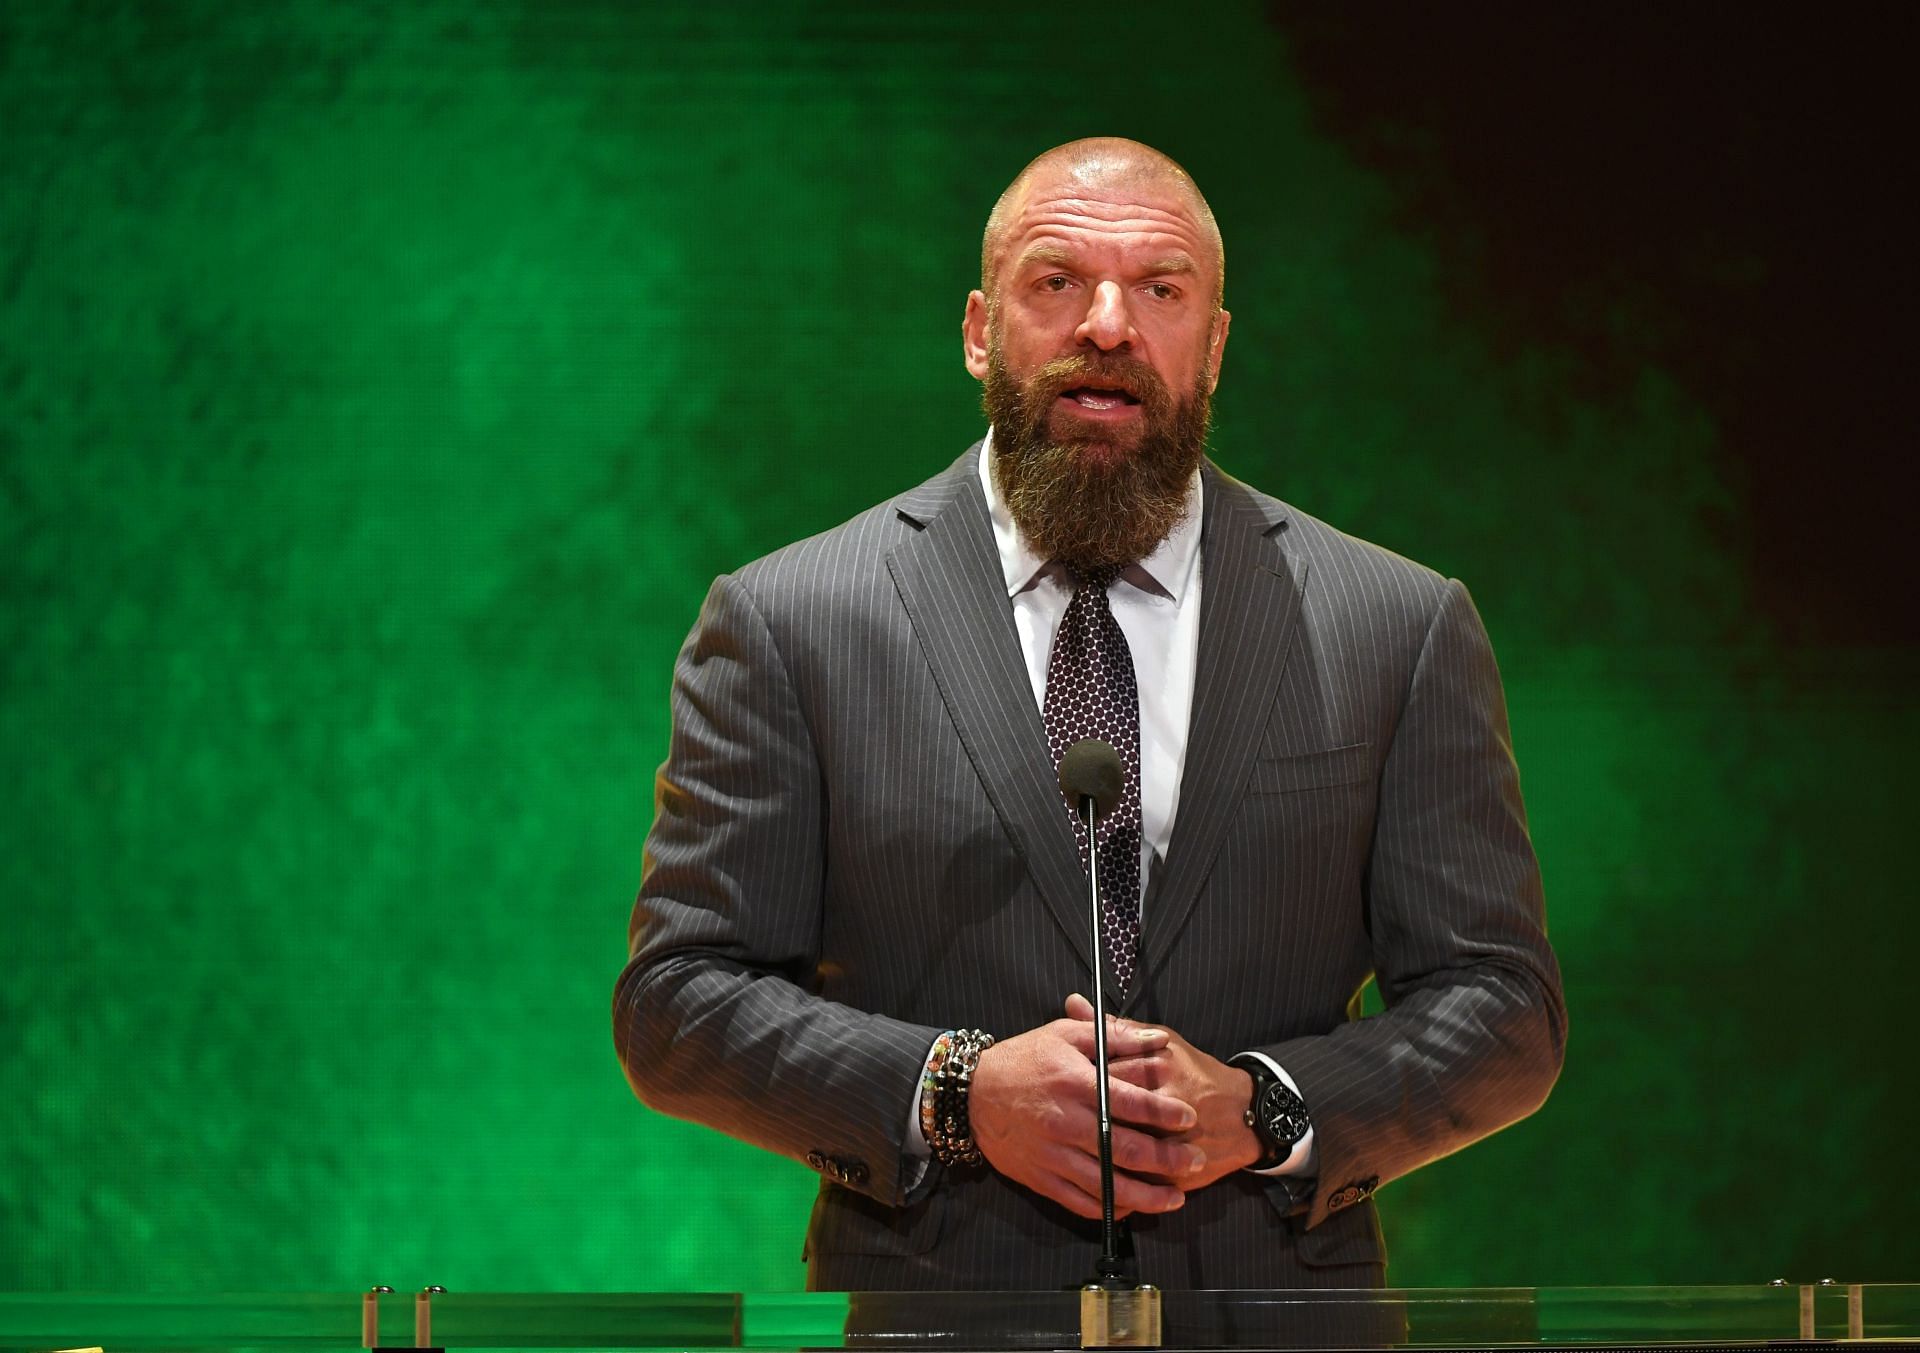 Triple H finds the football transfer window chaotic.